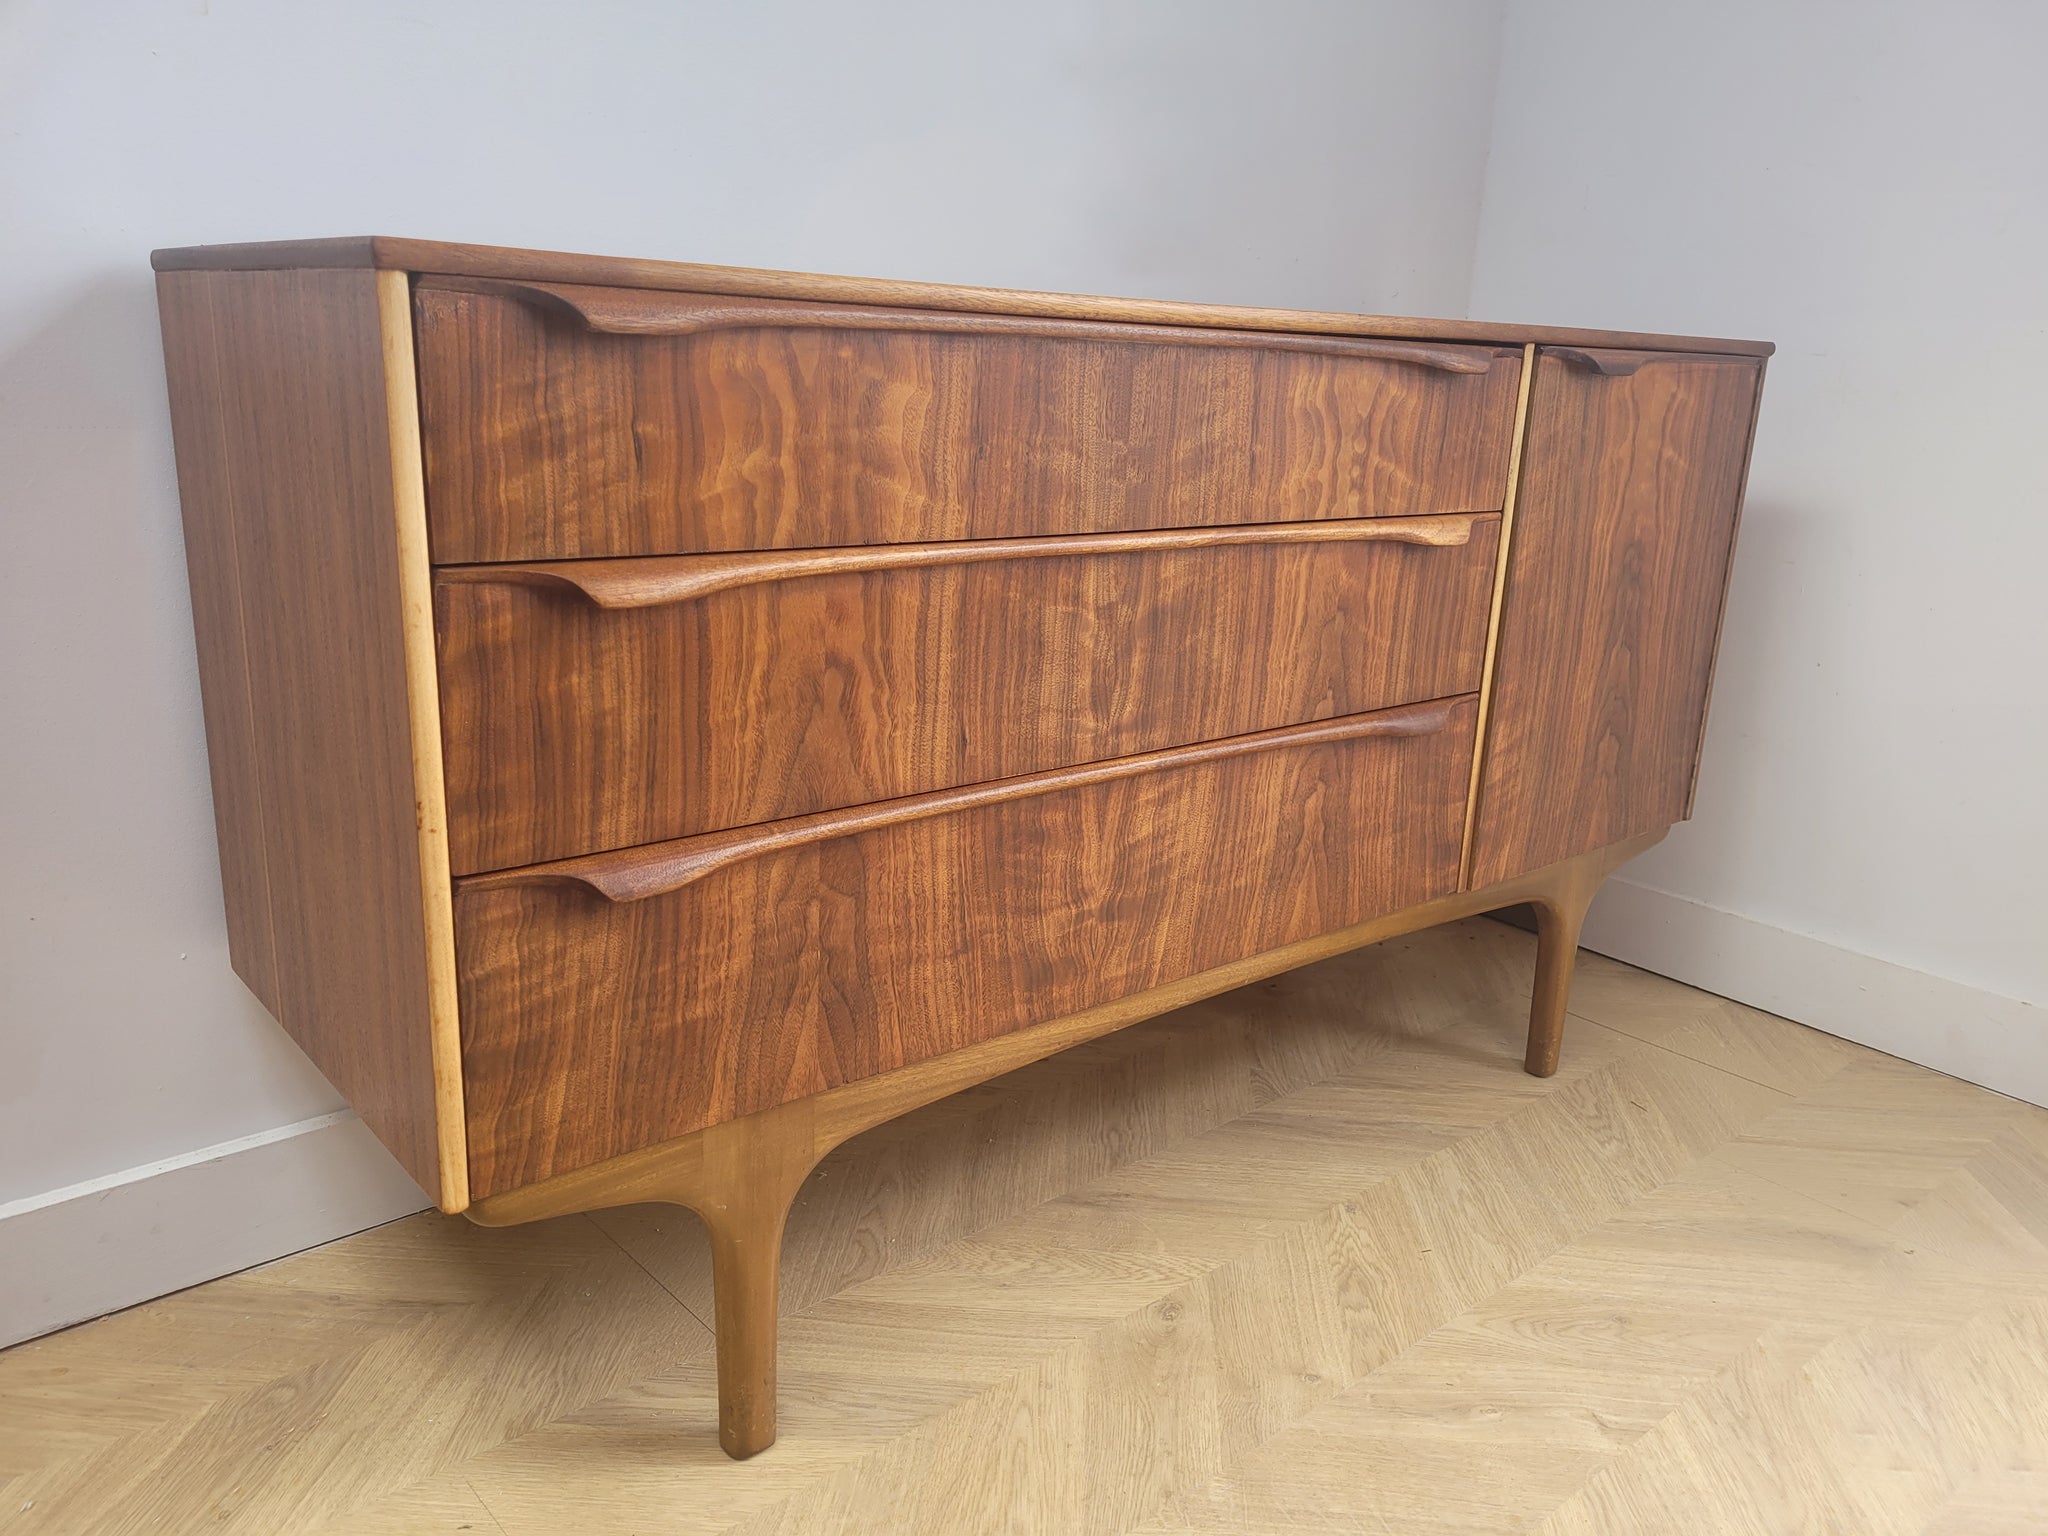 Sutcliffe of Todmorden Compact Sideboard